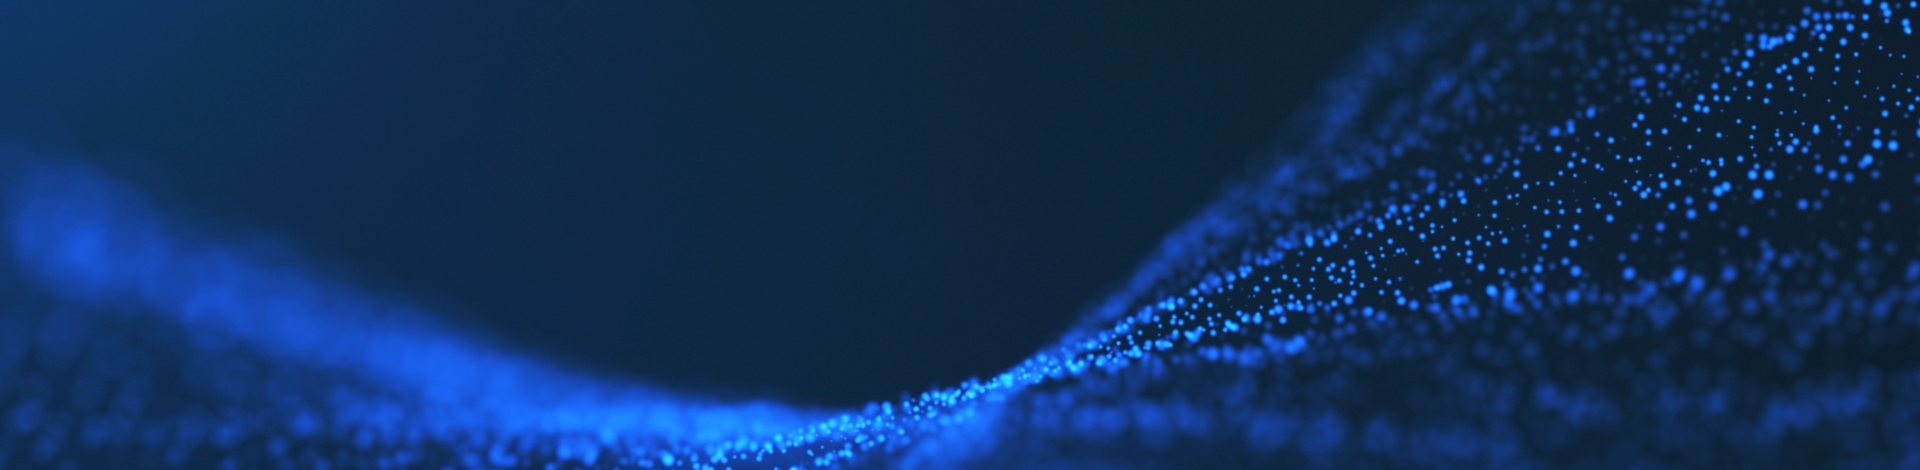 Blue particle wave flowing across the screen, depicting a dynamic, glowing curve of blue light composed of small, bright dots on a dark background.